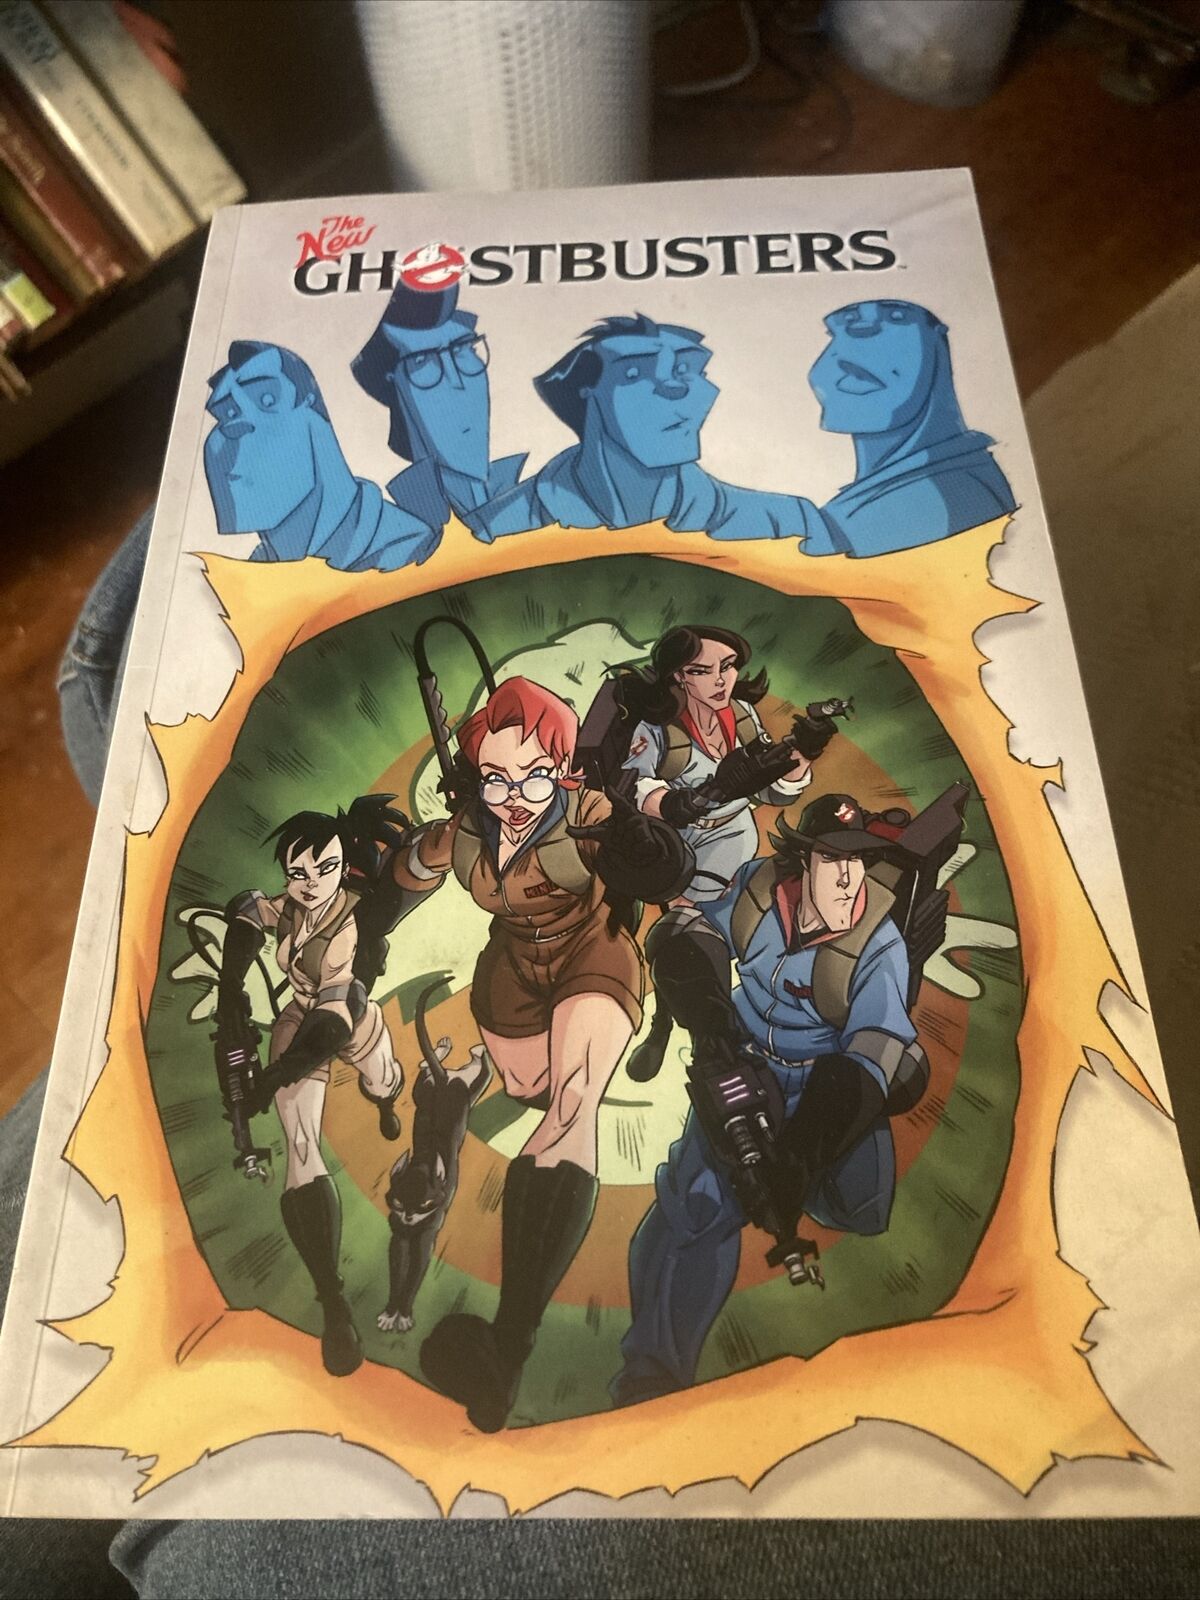 Ghostbusters Volume 5: The New Ghostbusters by Erik Burnham: